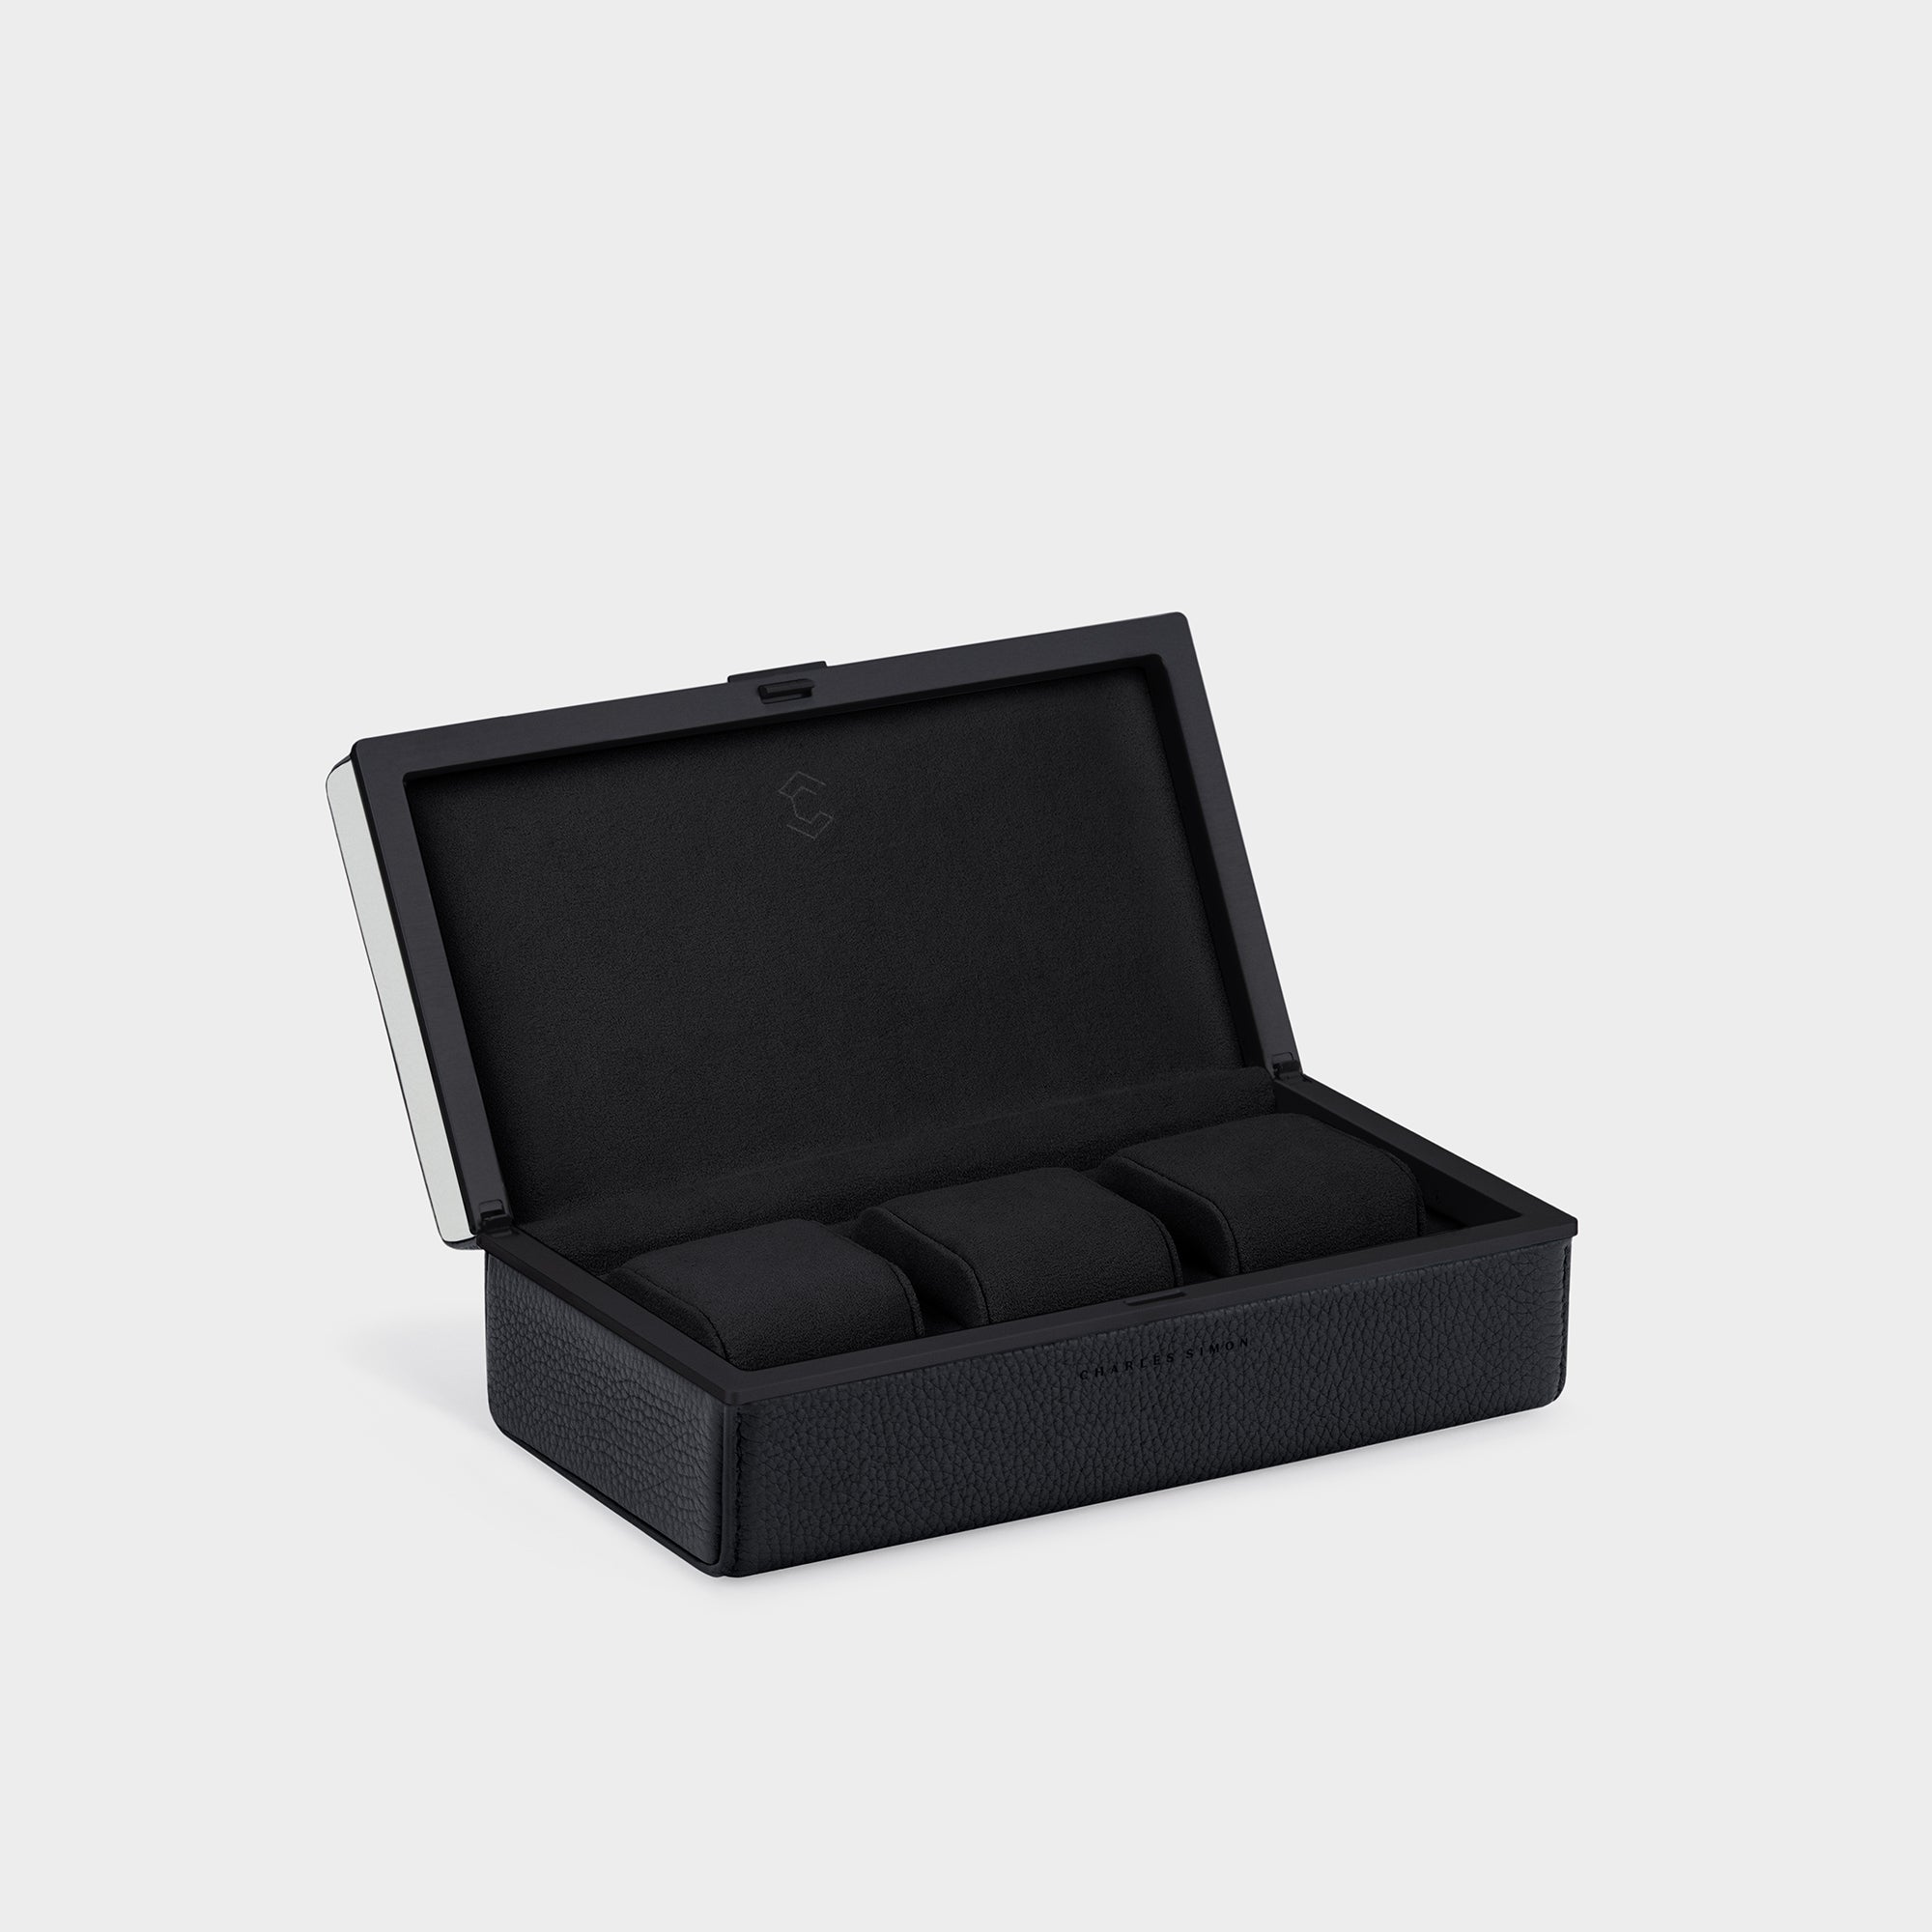 Product shot of Eaton 3 Watch case in all black with white top handmade to store up to 3 watches